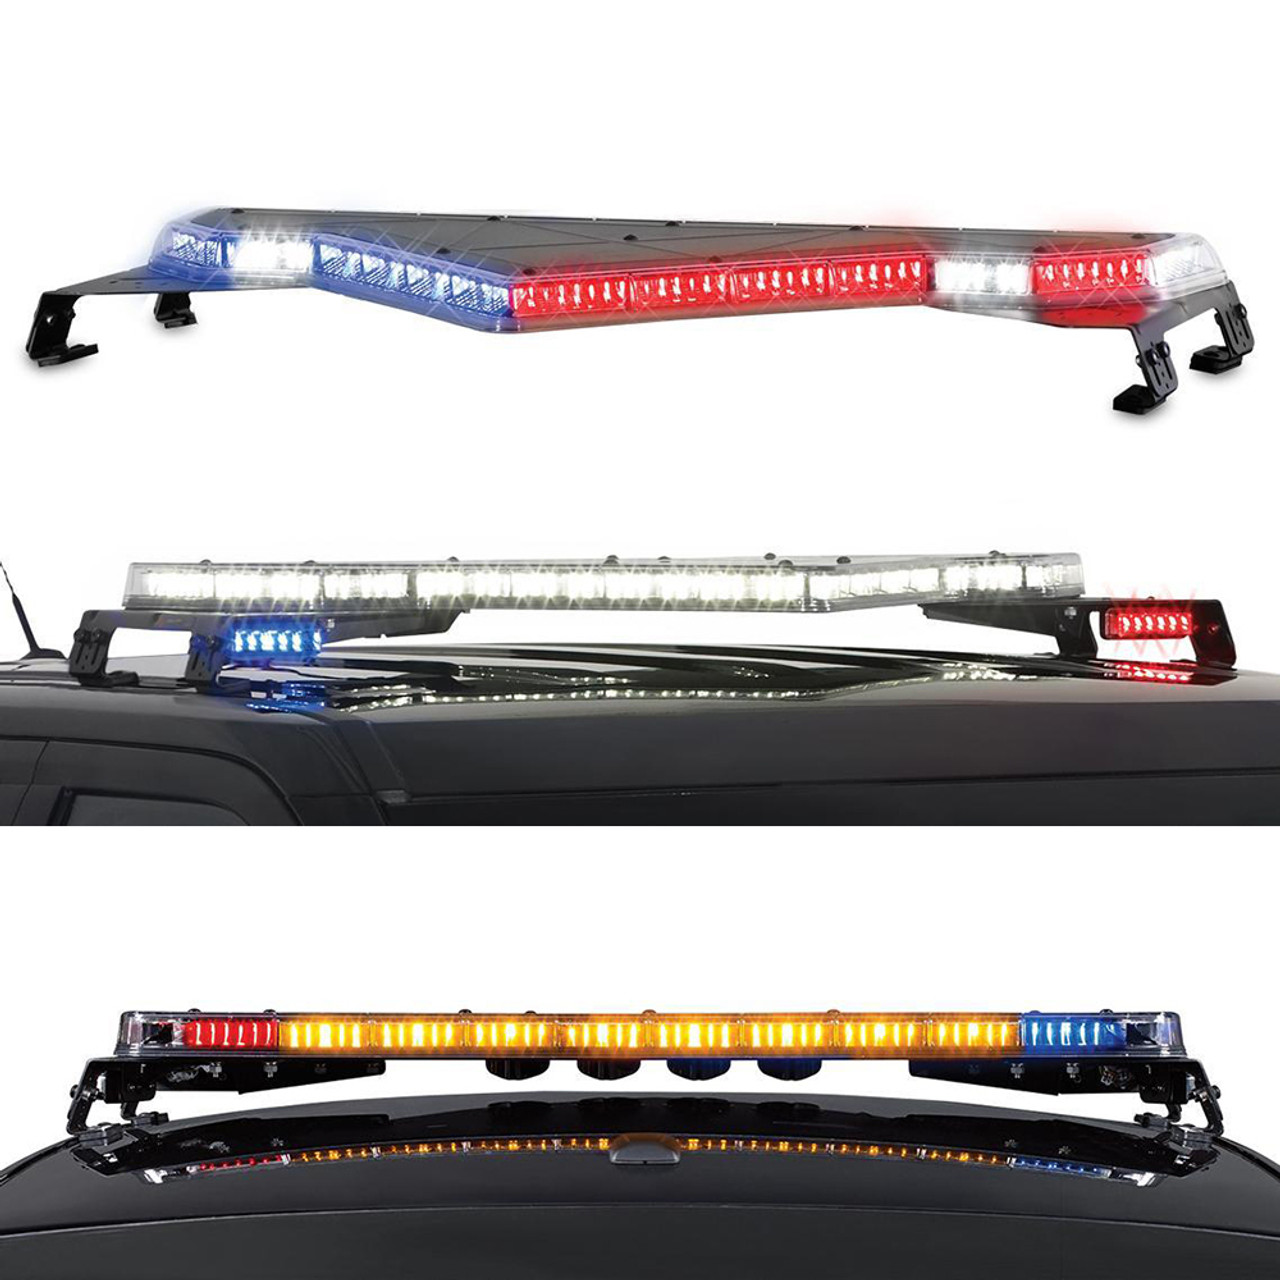 Federal Signal Valor LED Light Bar Dual Color with Full Flood and Traffic Advisor, RED/WHITE-BLUE/WHITE FRONT - RED/AMBER-BLUE/AMBER REAR, with or without interface module, 44 inch - CLOSEOUT PRICING WHILE SUPPLIES LAST.